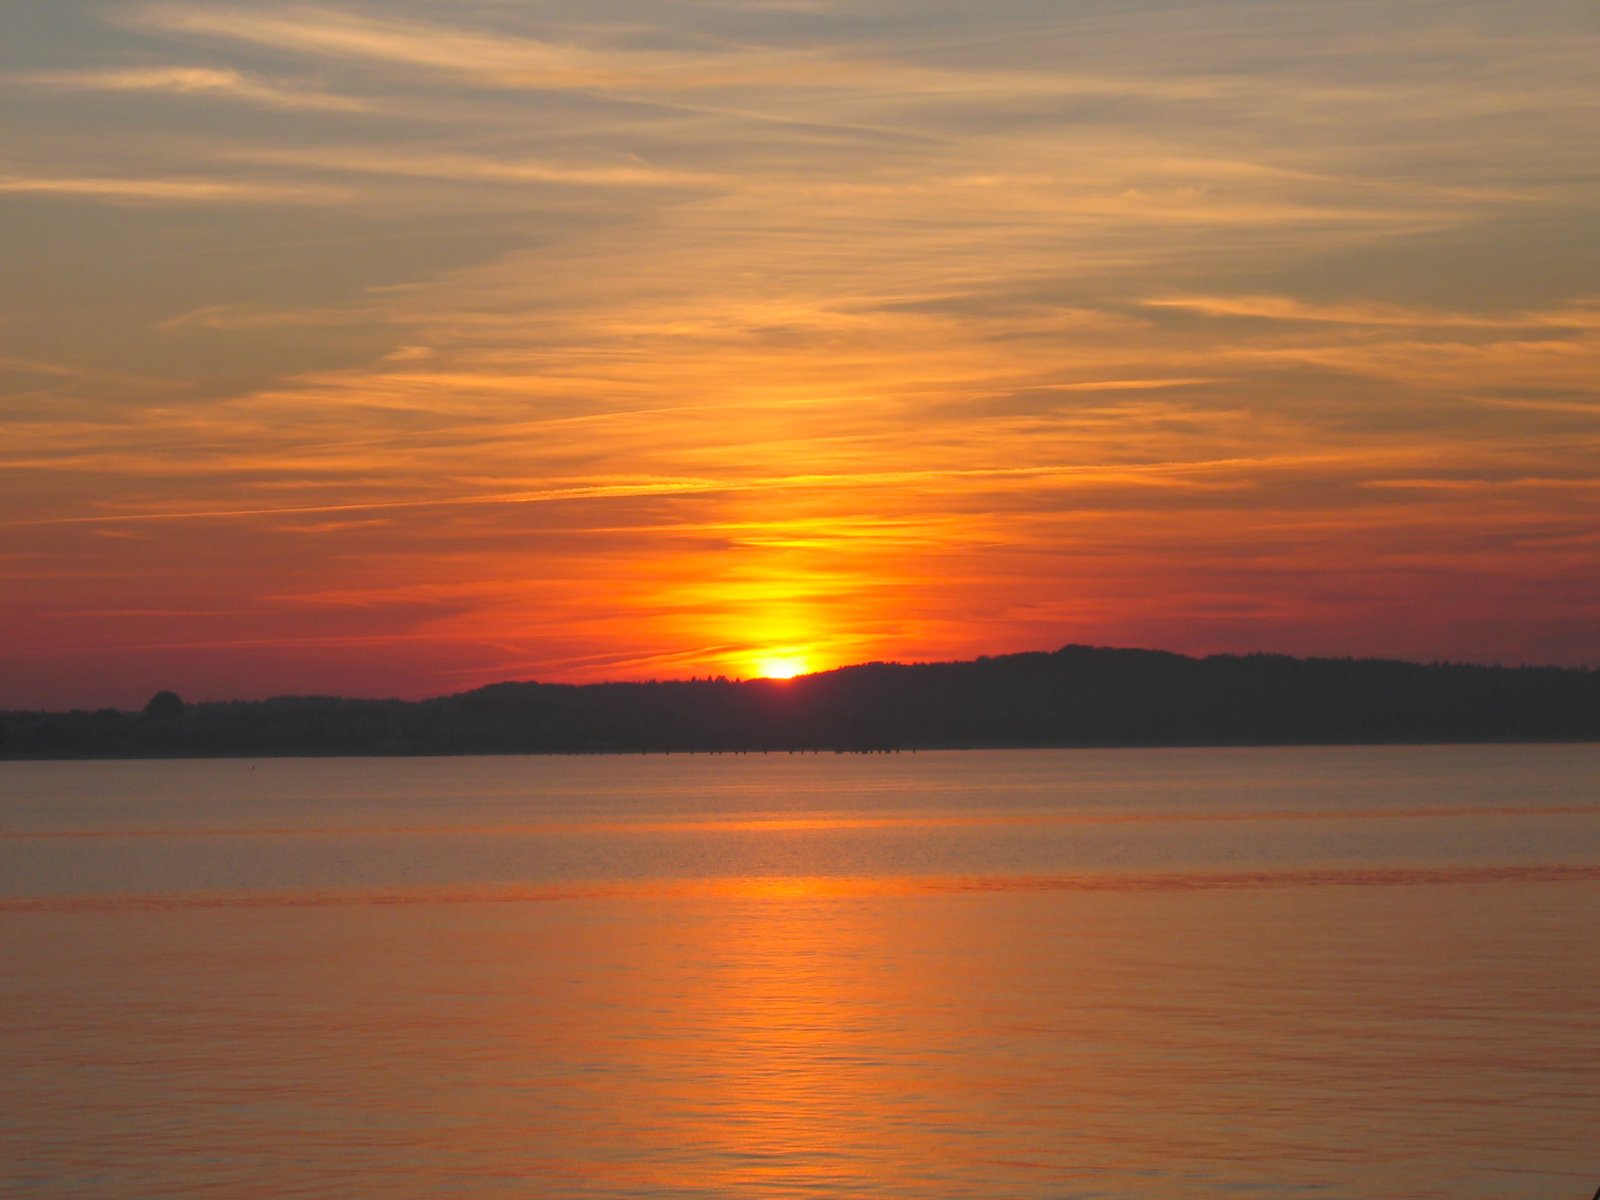 a sunset seen over water with hills in the background